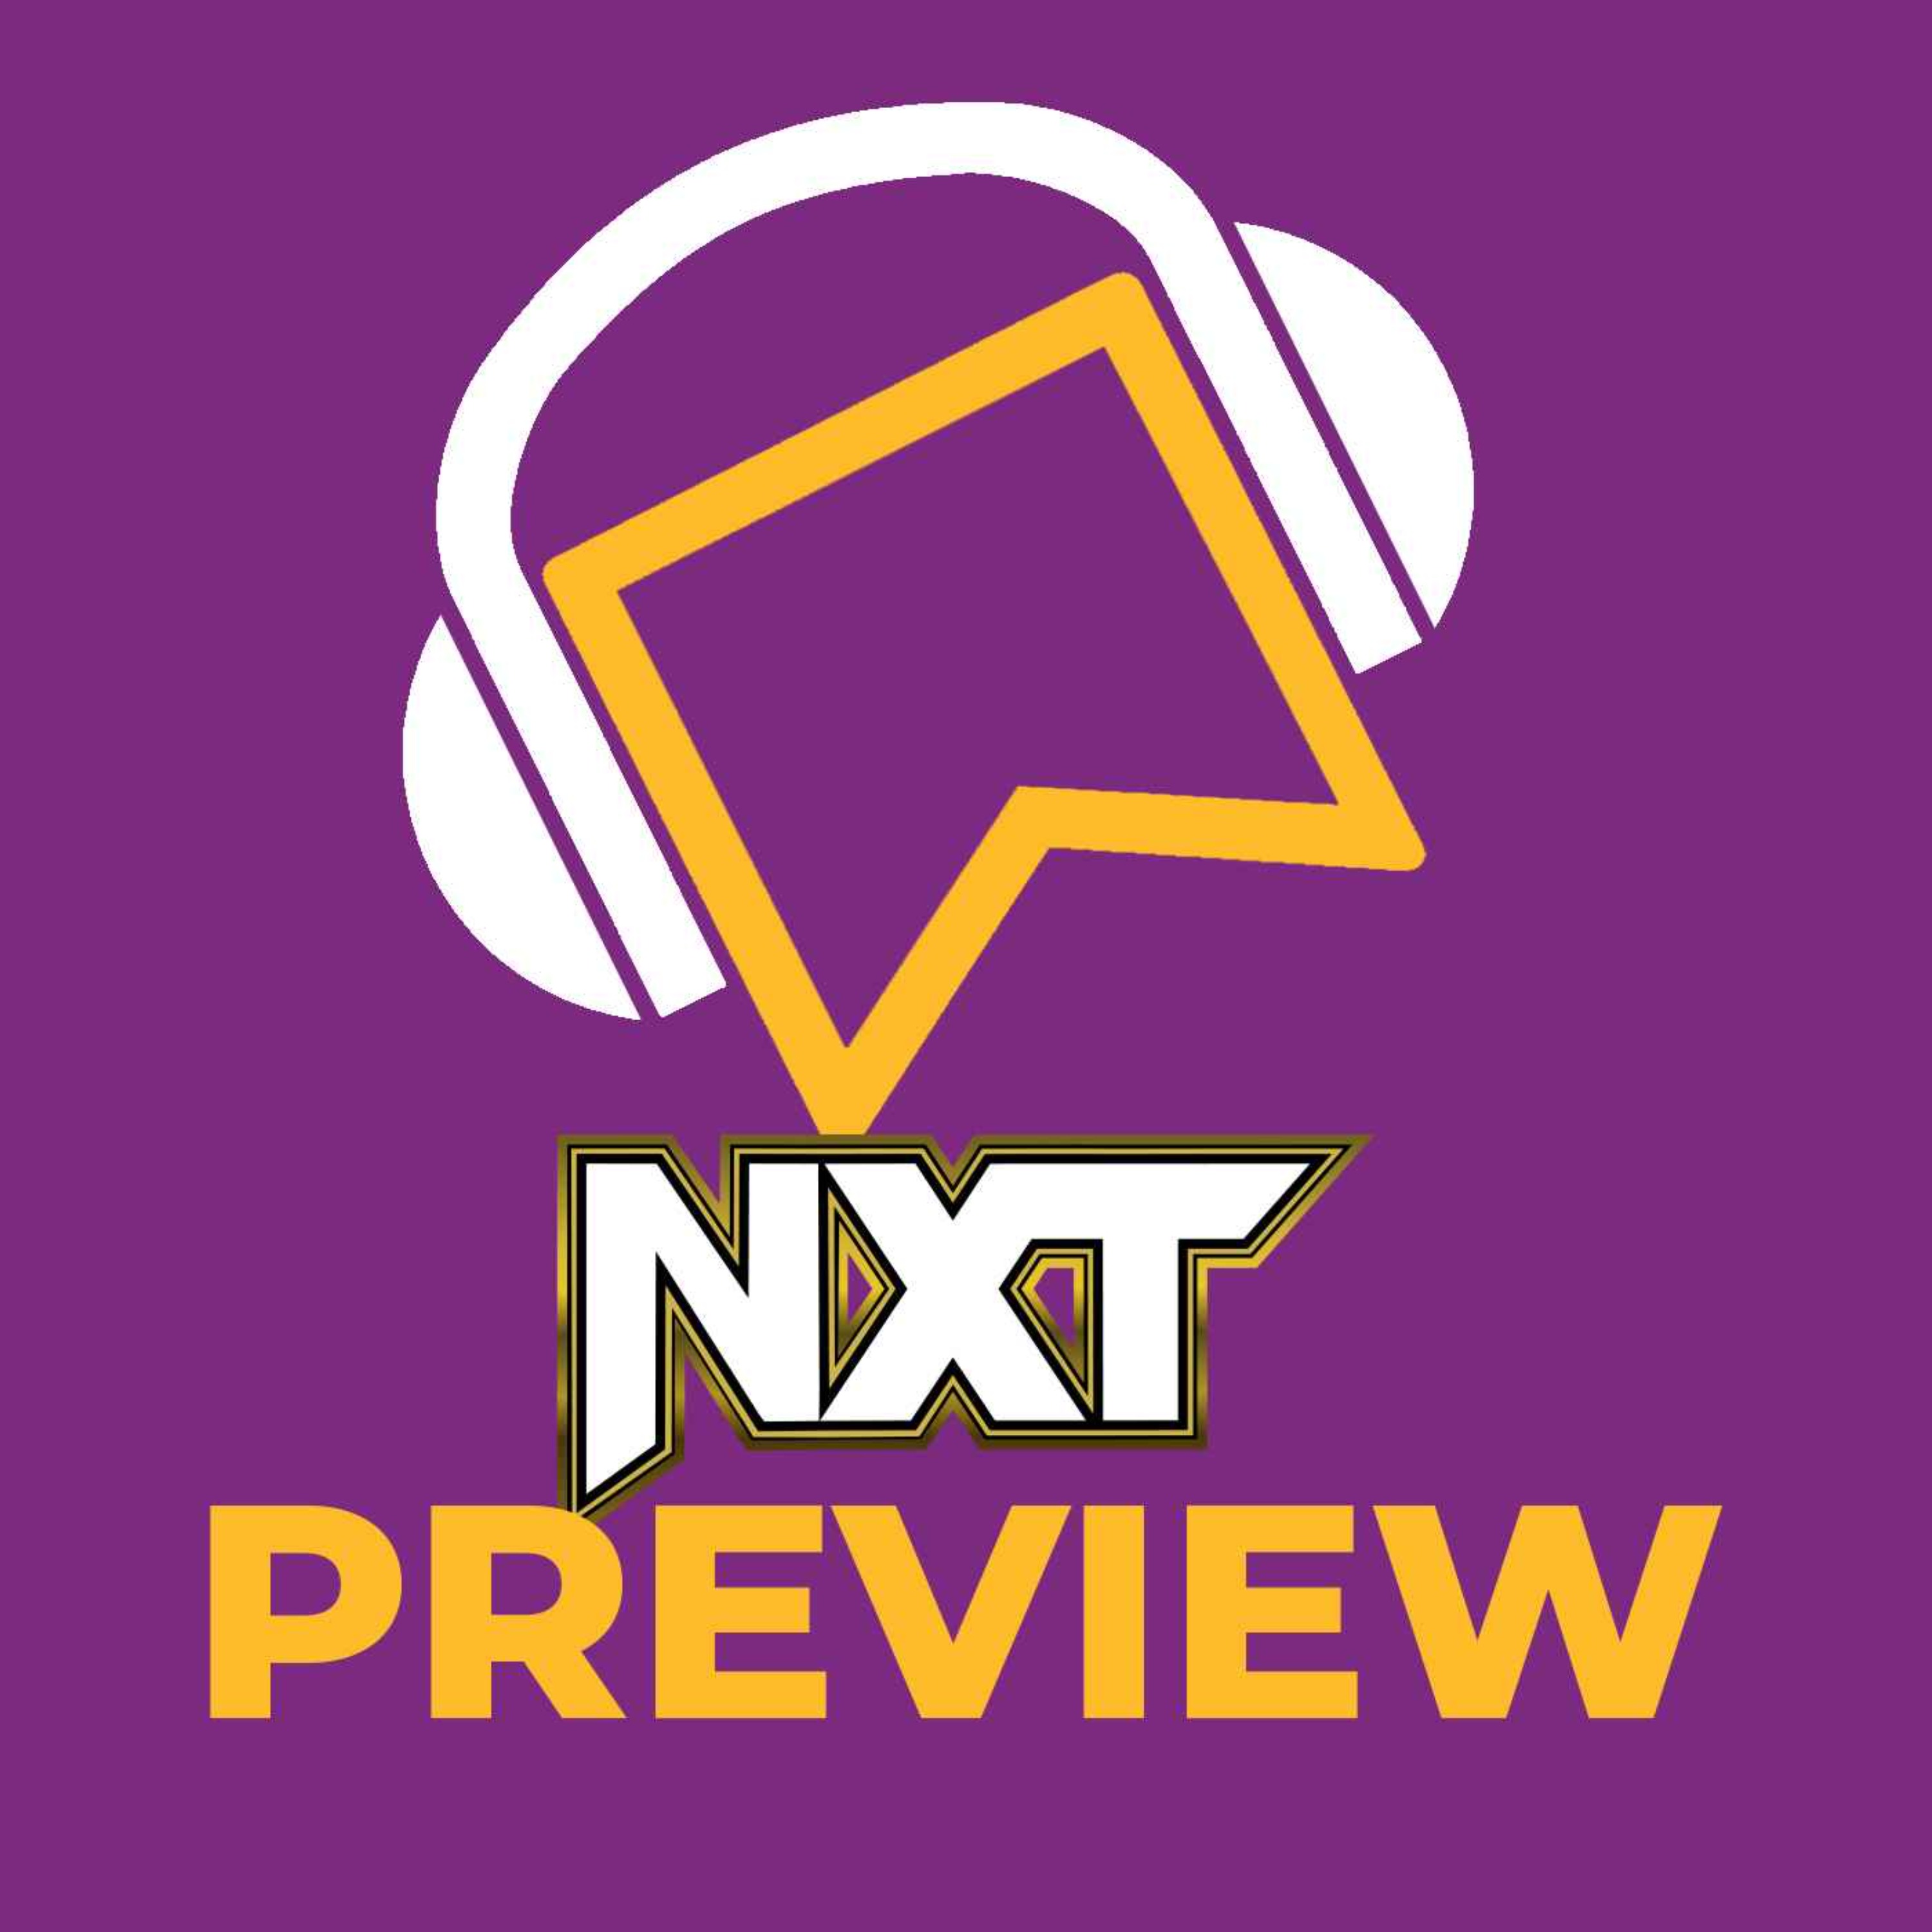 WWE NXT Preview - Spring Breakin' FALLOUT! NXT Women's Title On The Line! Trick Williams On Supernova Sessions! Will Gigi Dolin's Latest Lesson Be Cheating?!